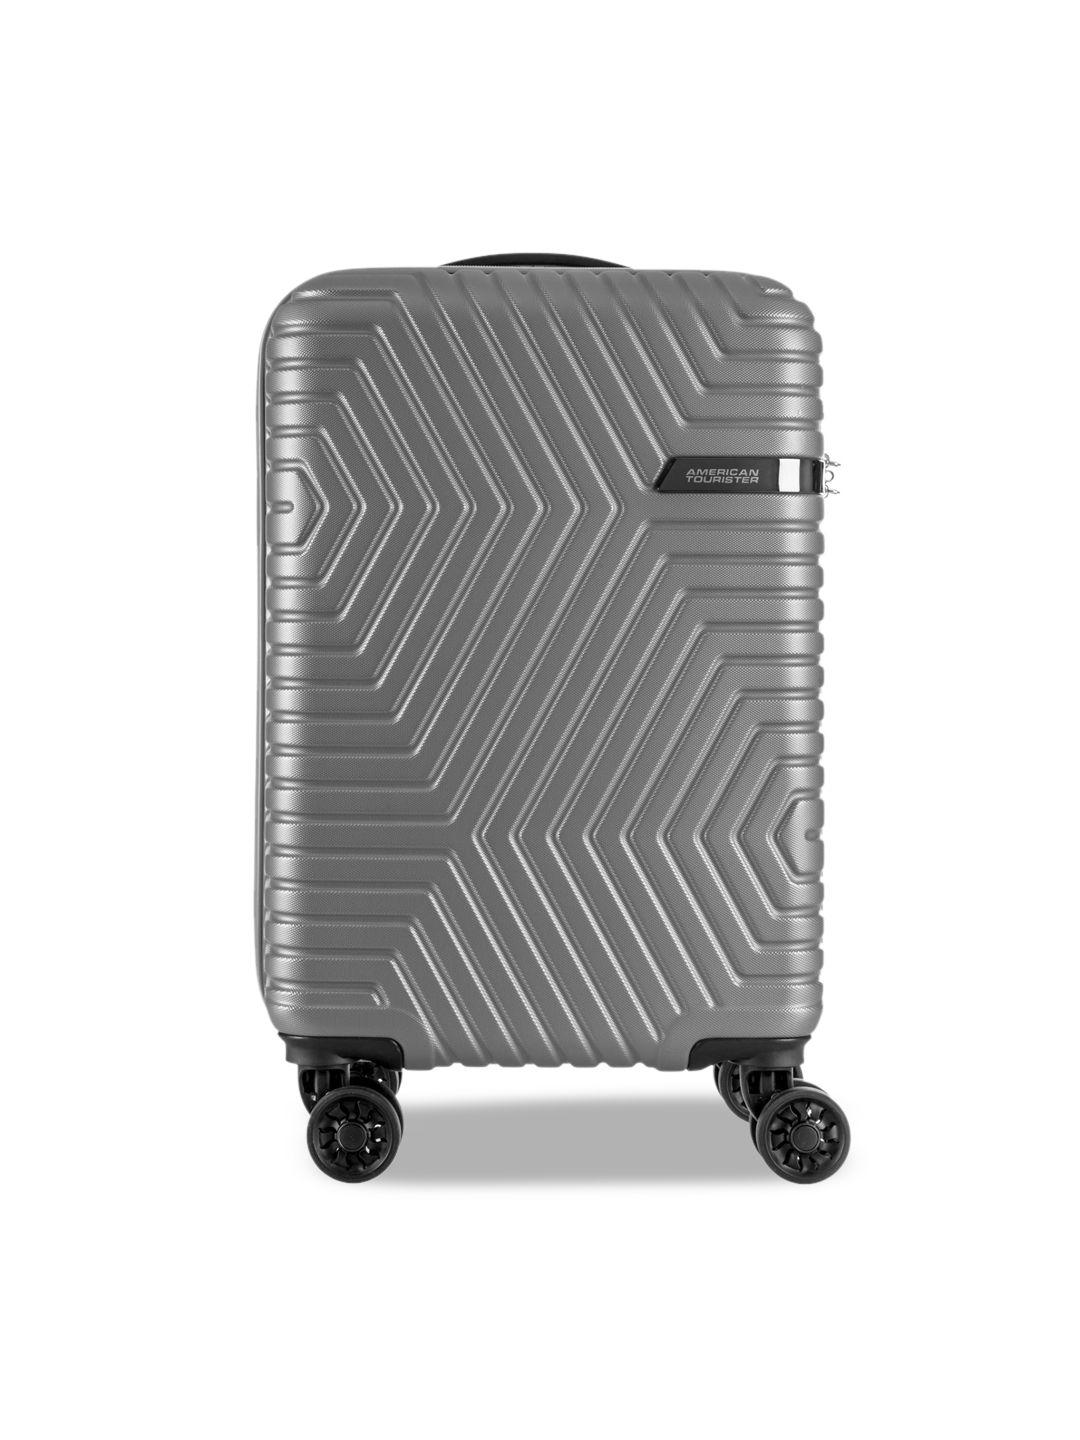 american tourister grey textured hard-sided medium trolley suitcase